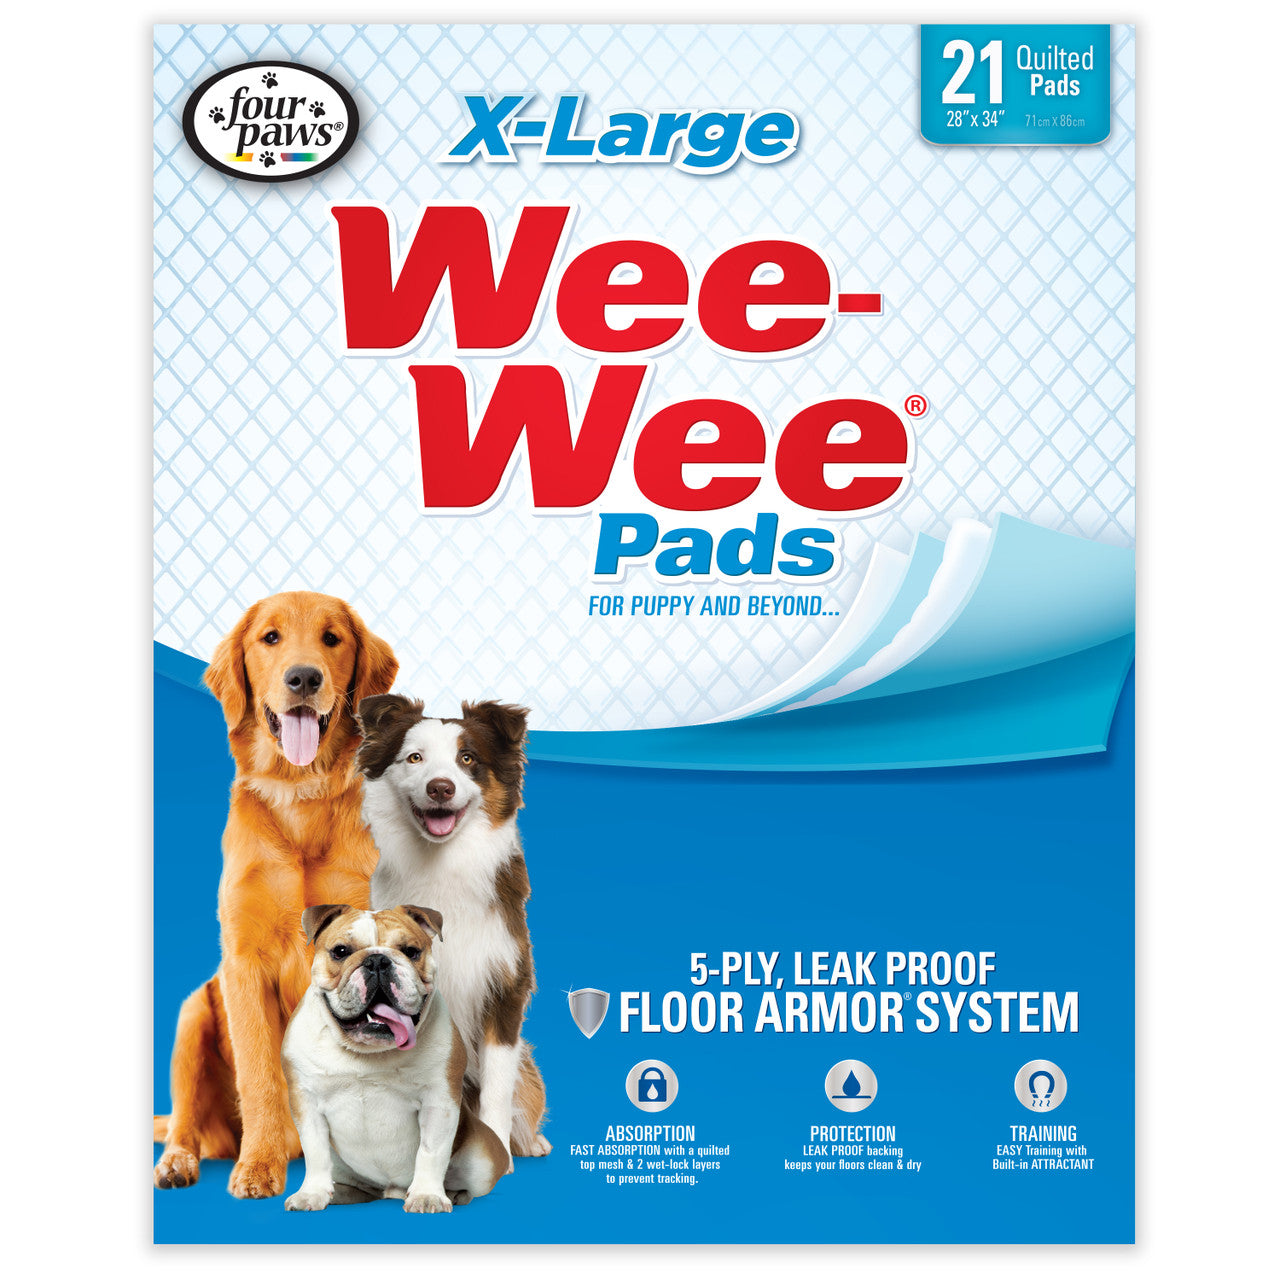 Four Paws Four Paws Wee-Wee Superior Performance X-Large Dog Pee Pads 21 Count X-Large 28" x 34"